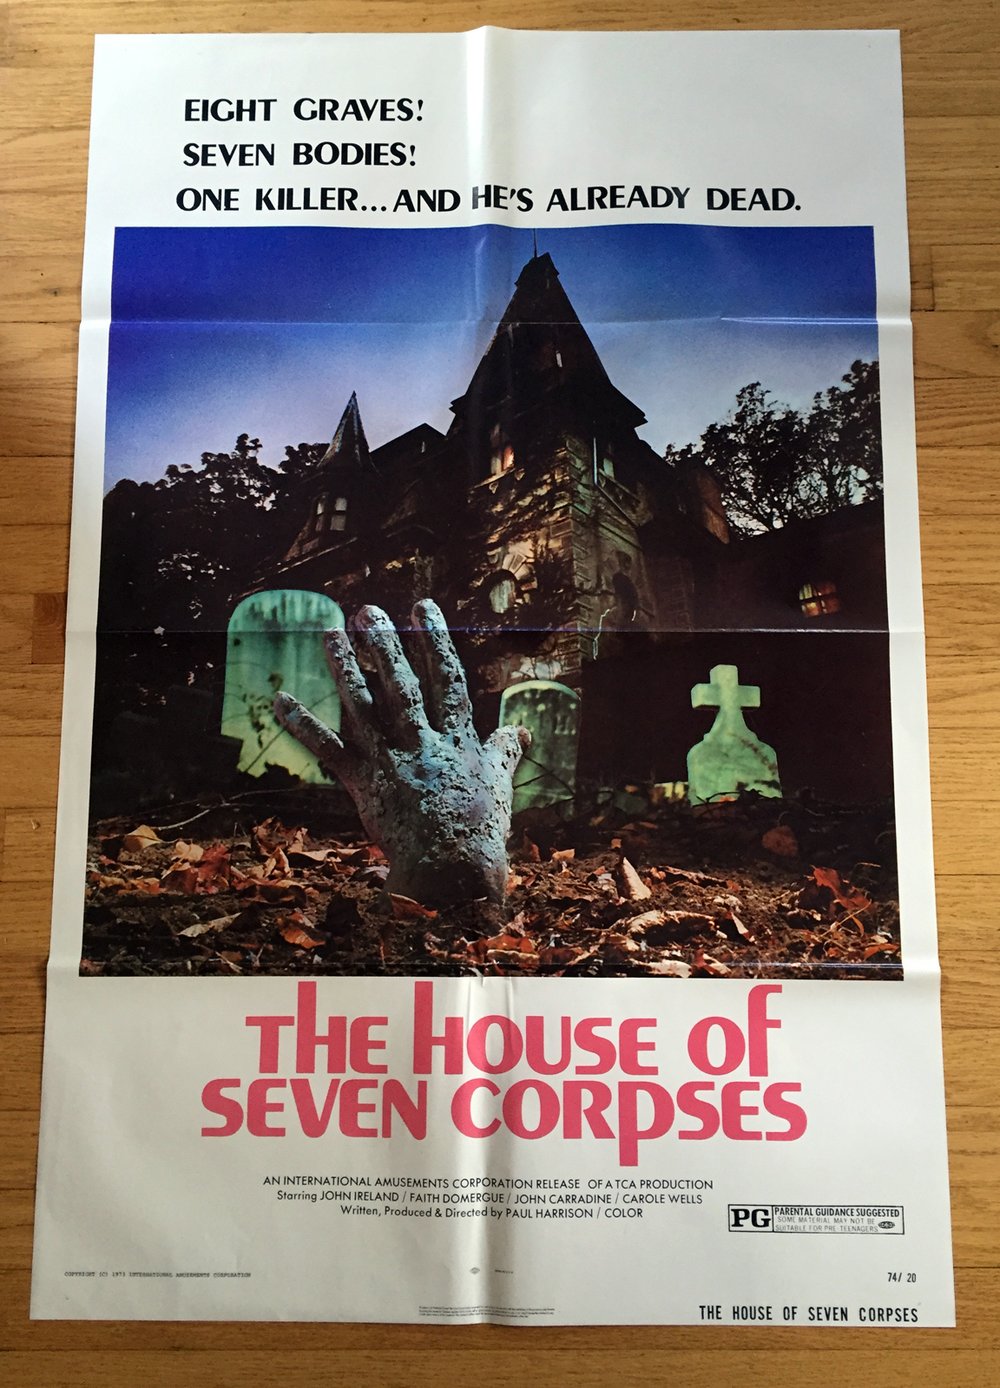 1974 THE HOUSE OF SEVEN CORPSES Original U.S. One Sheet Movie Poster